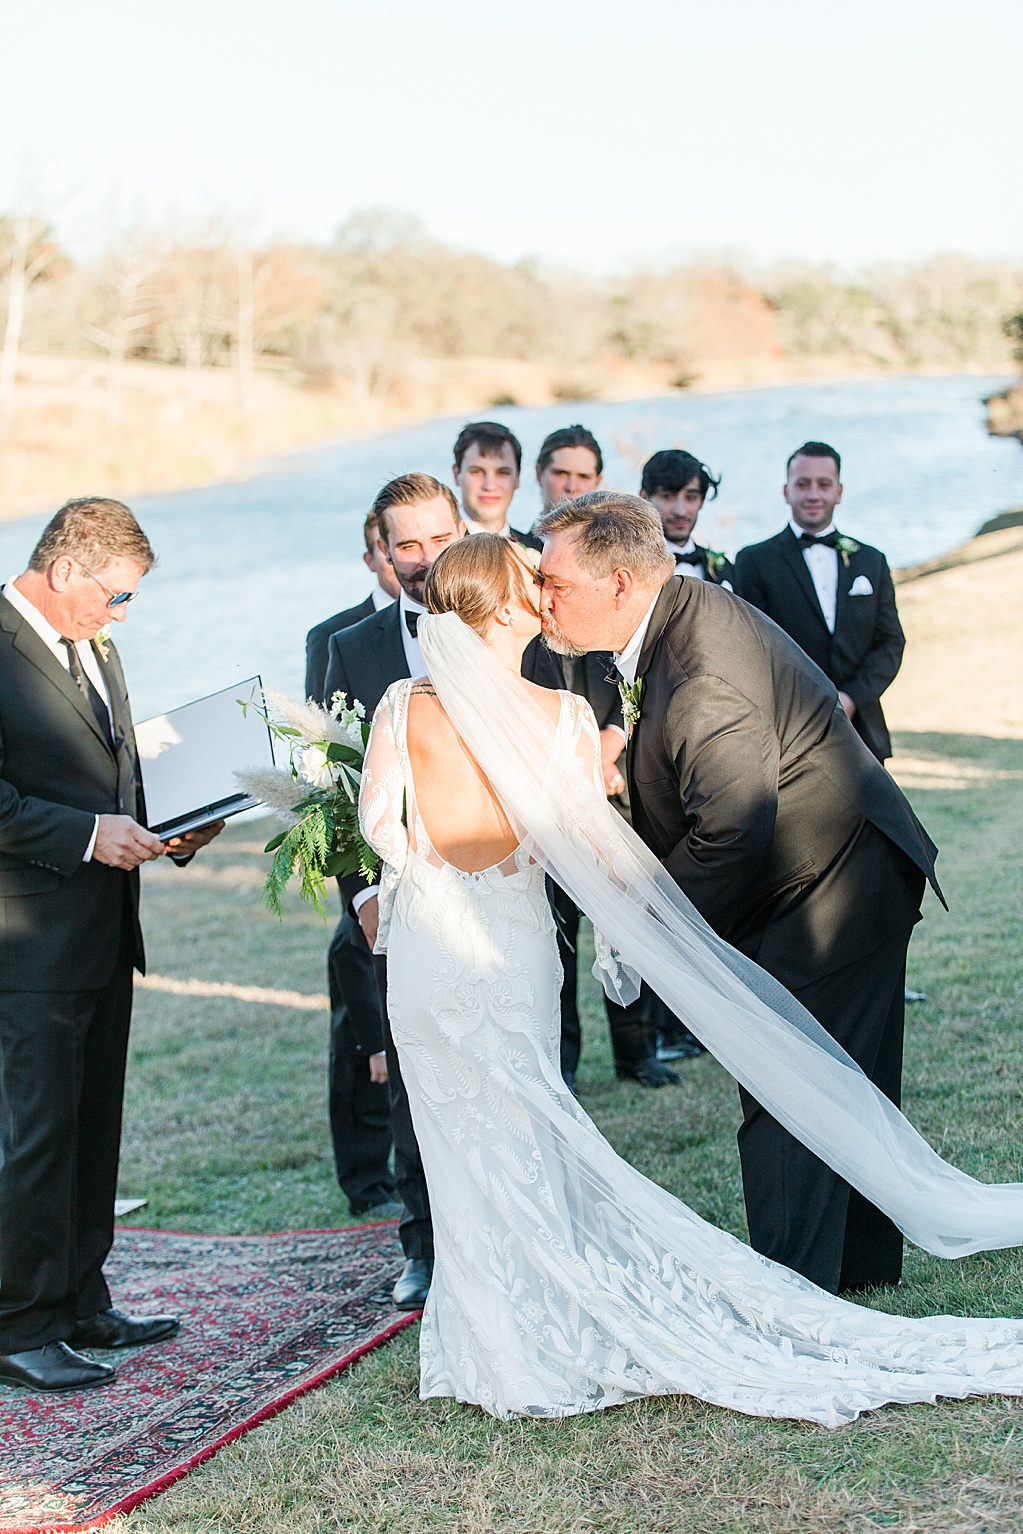 Hill Country Wedding at Turtle Creek Olive Grove wedding venue in Kerrville Texas by Wedding Photographer Allison Jeffers 0052